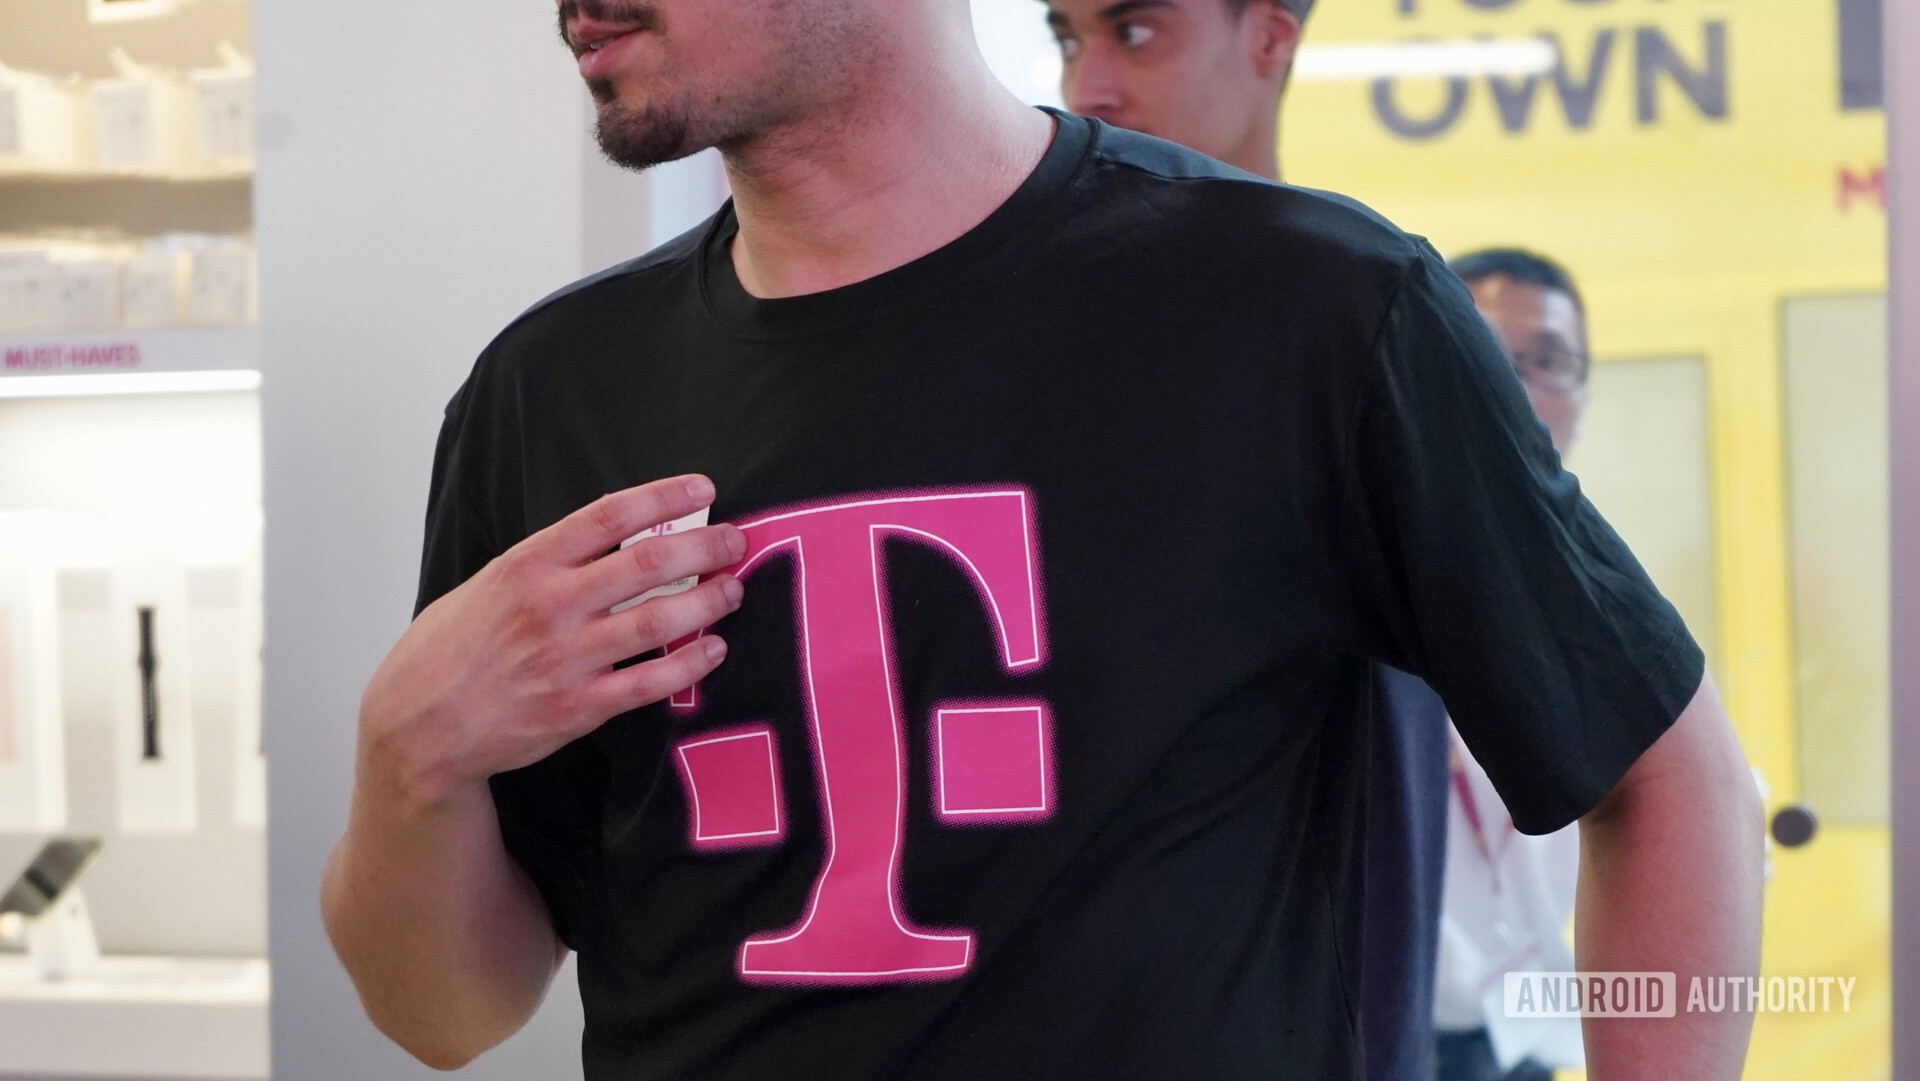 A T-Mobile employee wearing a black t-shirt with the T-Mobile logo.